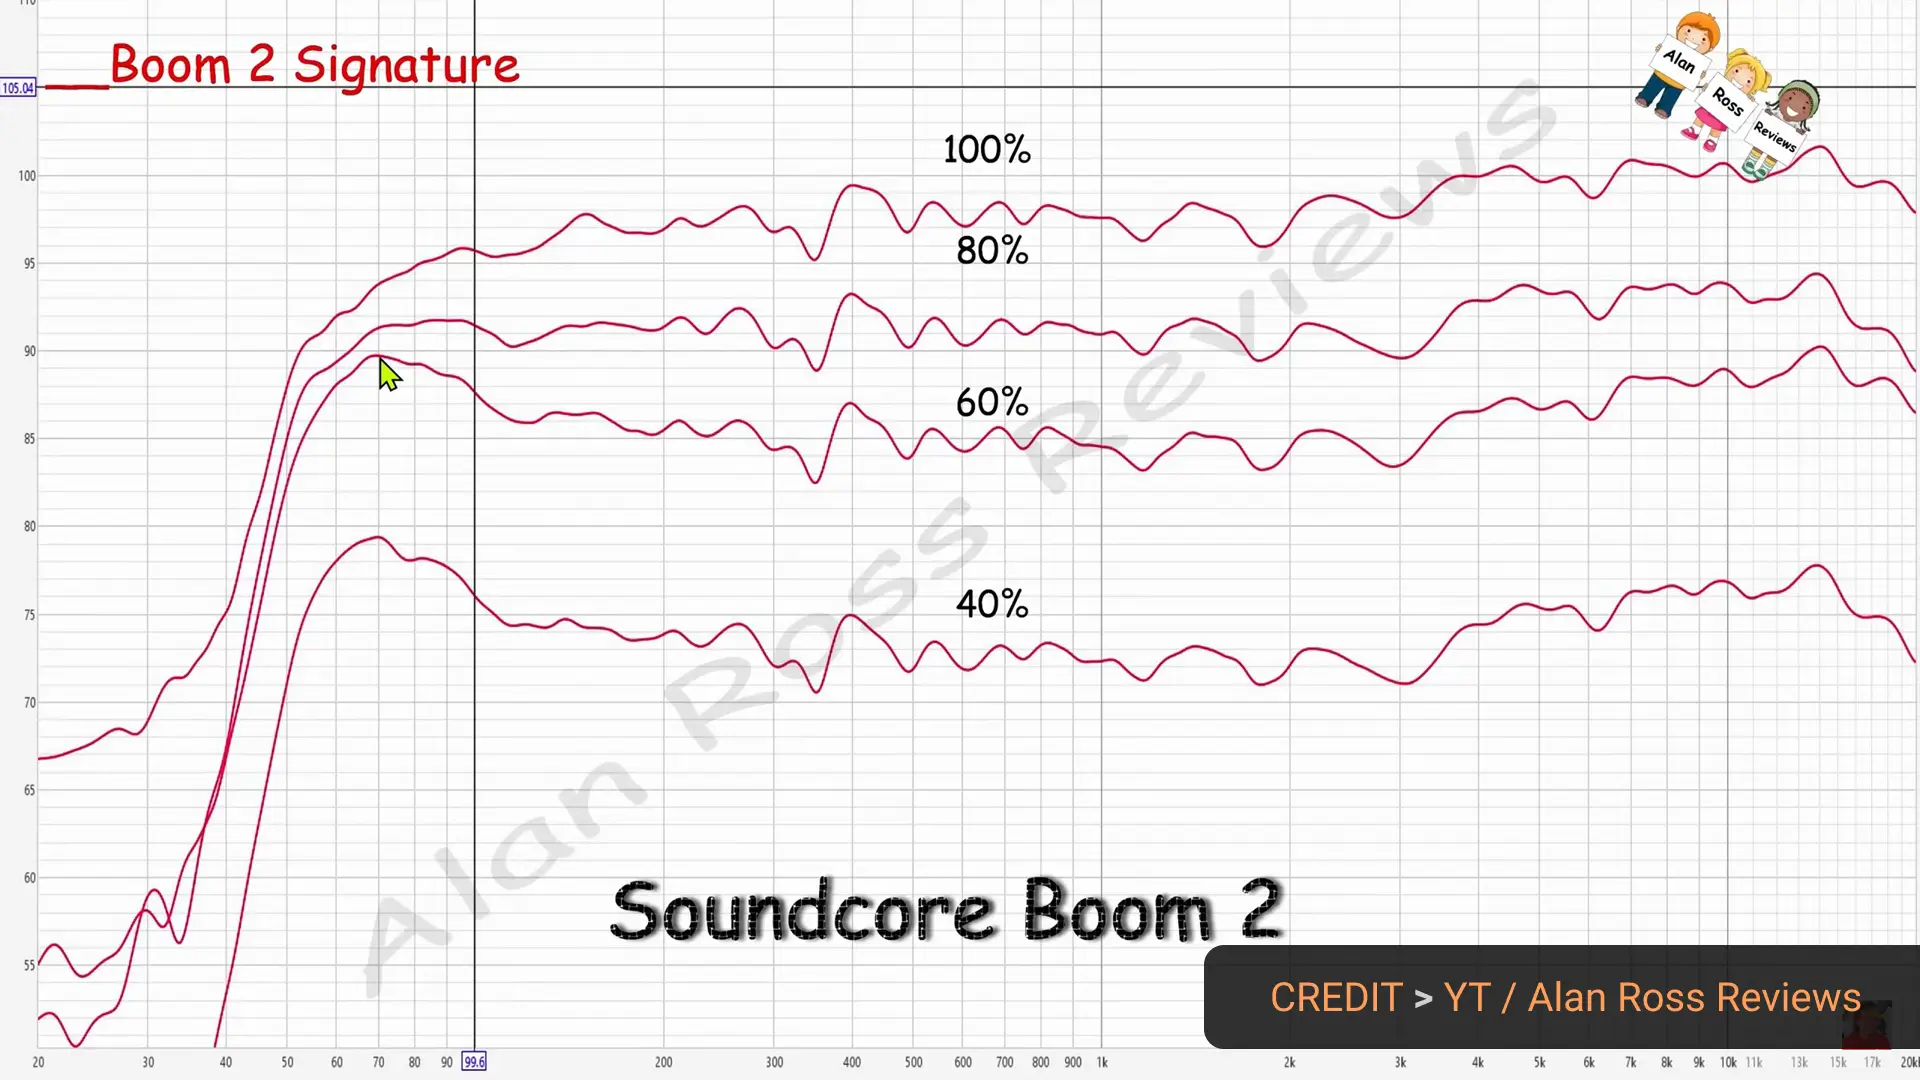 Soundcore Boom 2 frequency response